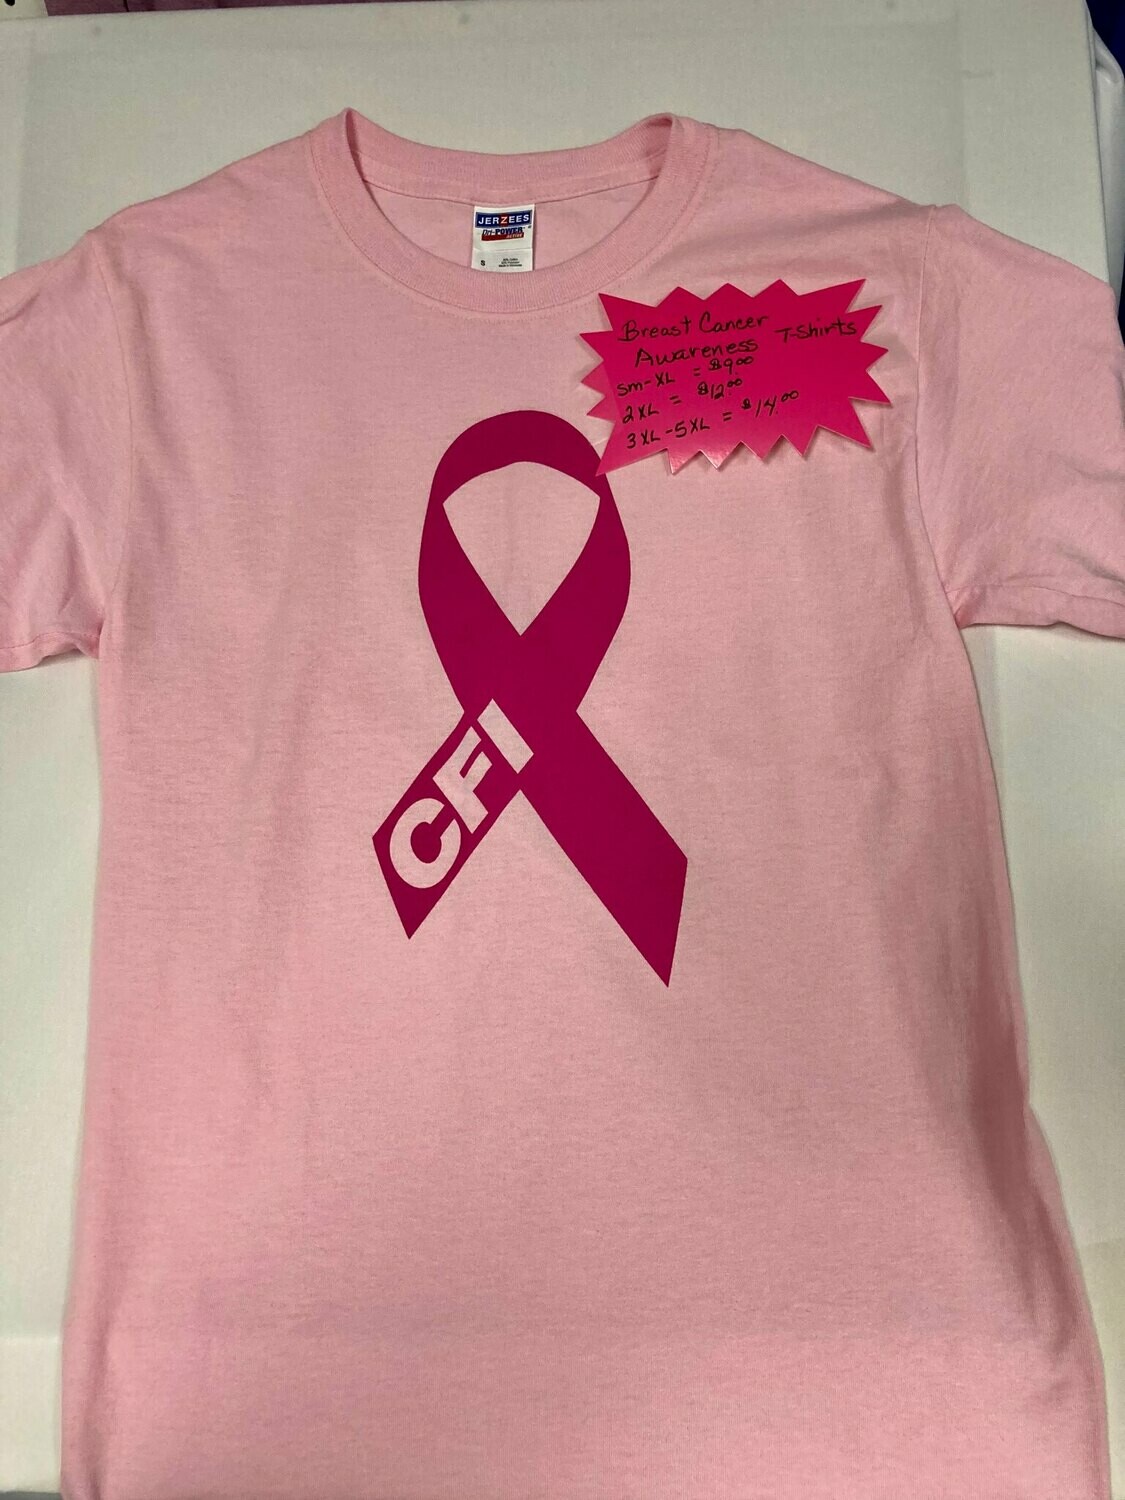 BREAST CANCER AWARENESS T-SHIRT CLASSIC PINK - LARGE